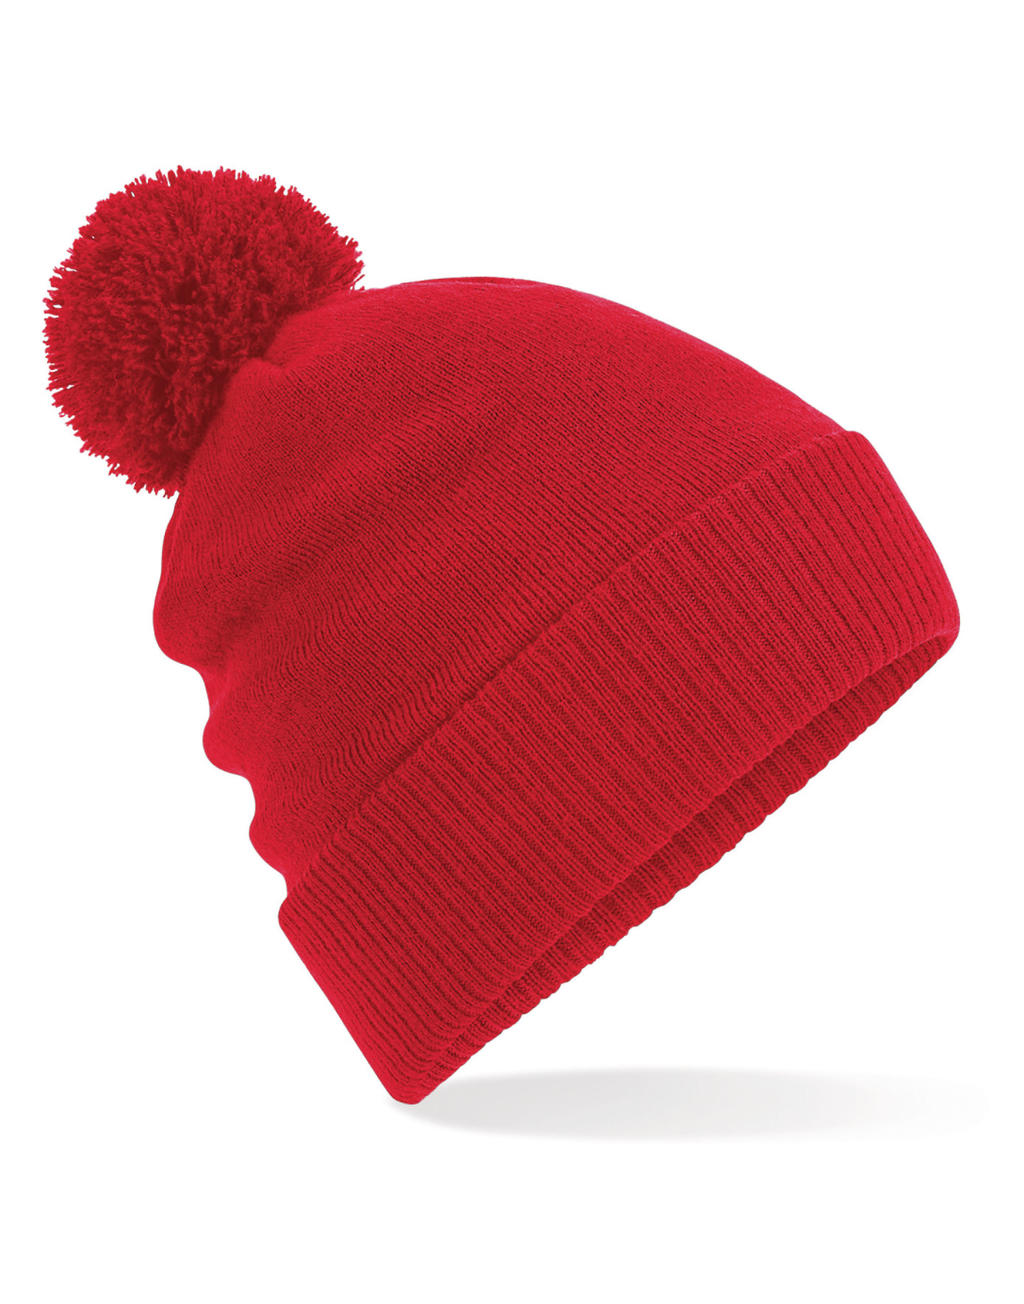  Thermal Snowstar? Beanie in Farbe Classic Red